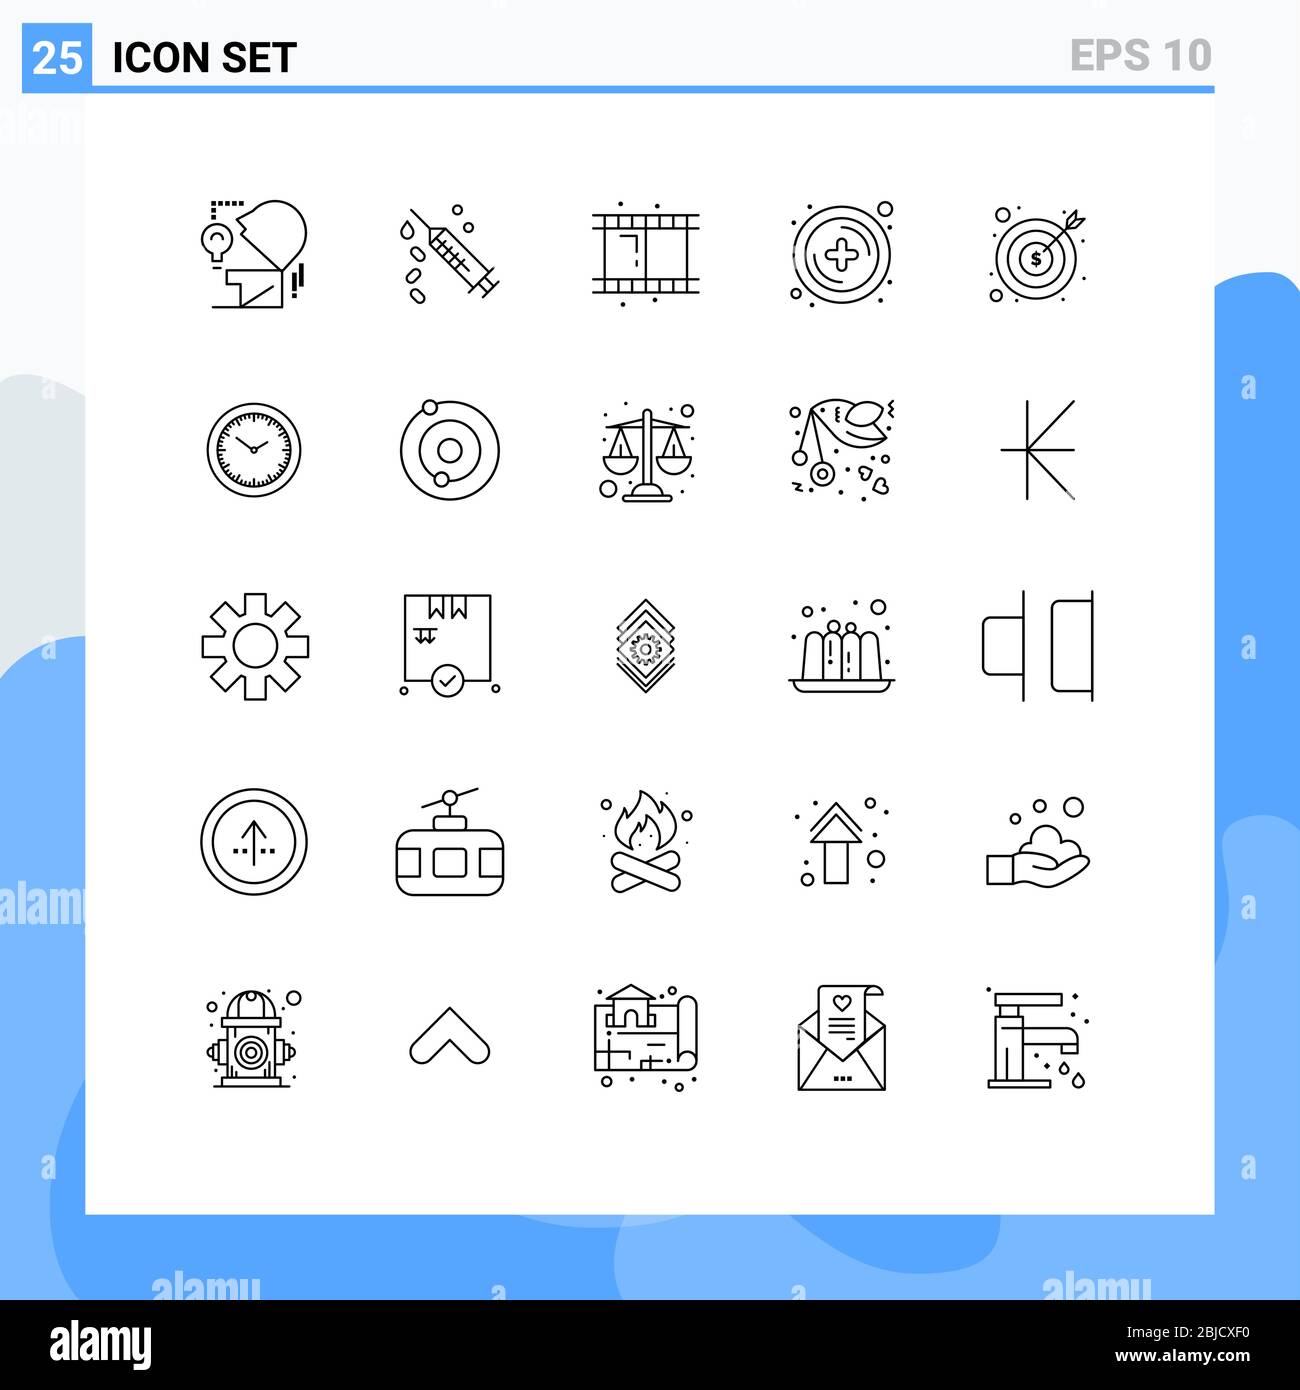 25 Creative Icons Modern Signs and Symbols of finance, business, film, banking, new Editable Vector Design Elements Stock Vector